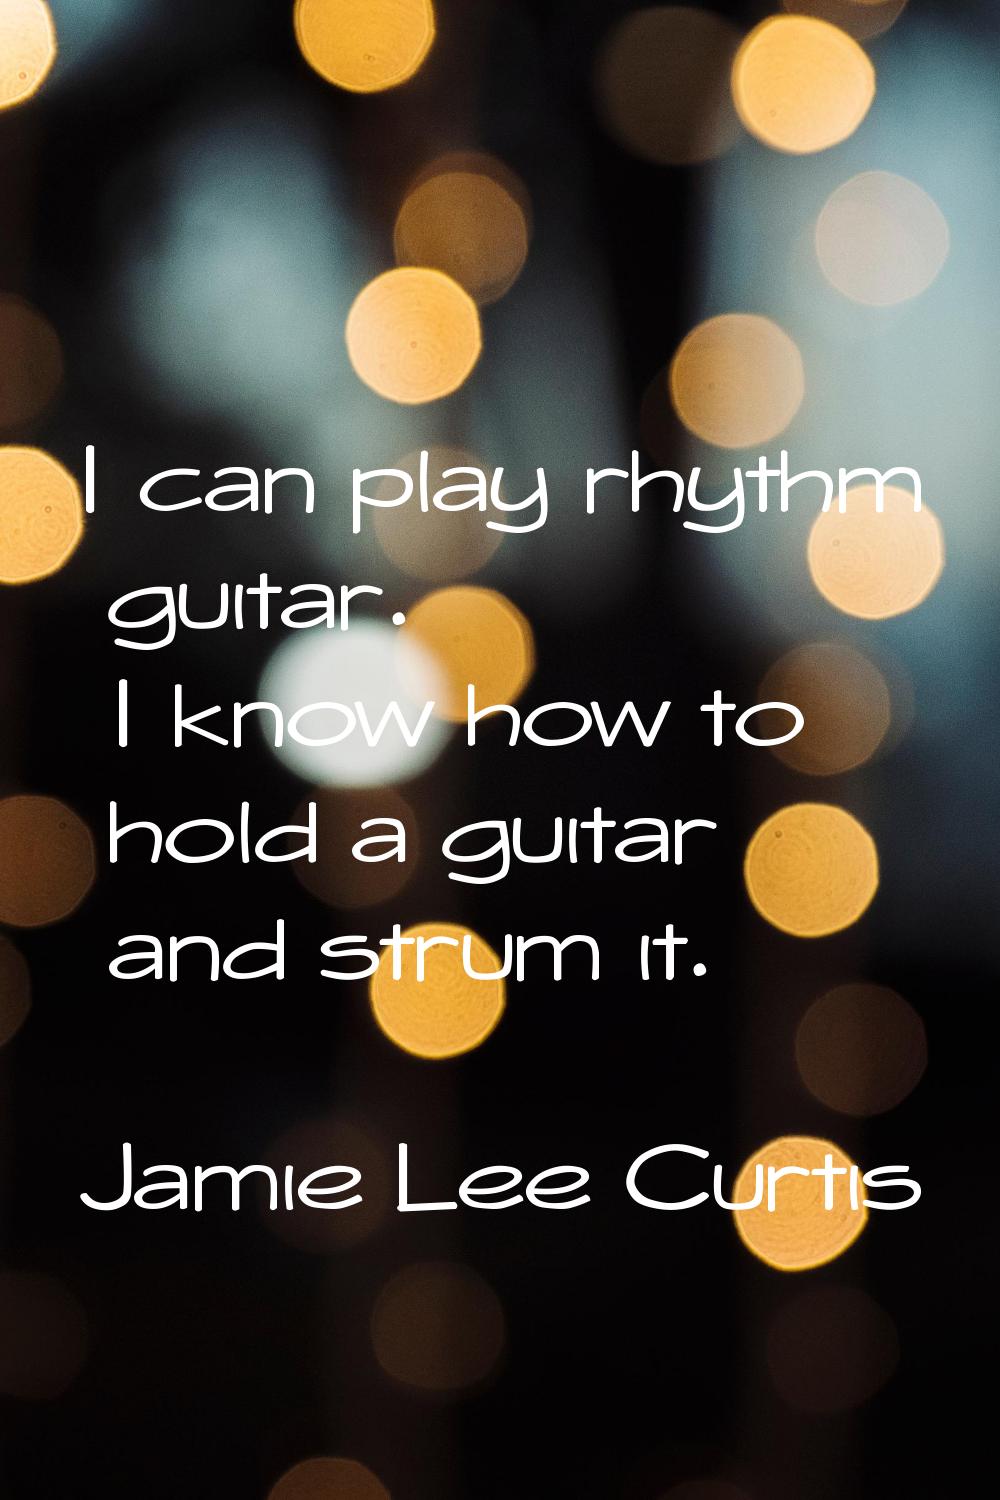 I can play rhythm guitar. I know how to hold a guitar and strum it.